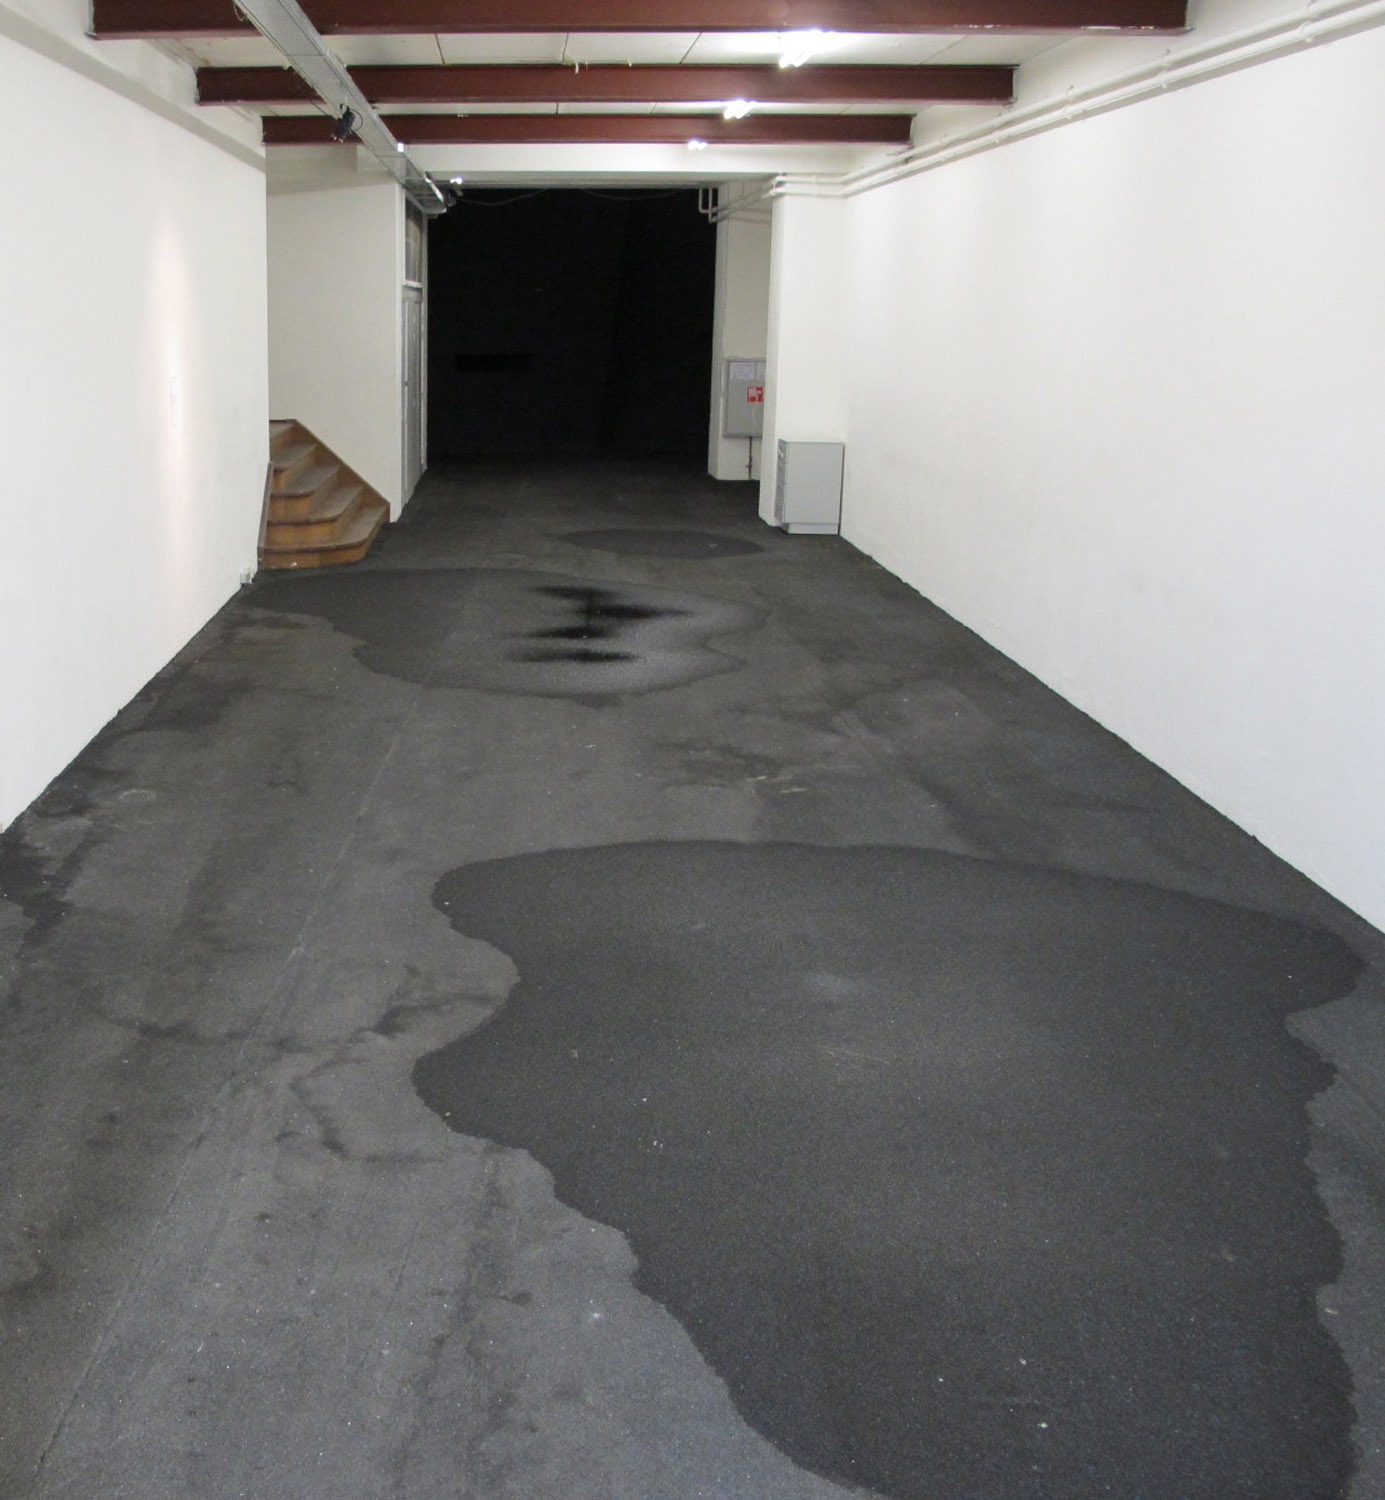 This is Not a Work, 2011. Pipes, dripping water, puddles. Installation view W139, Amsterdam.